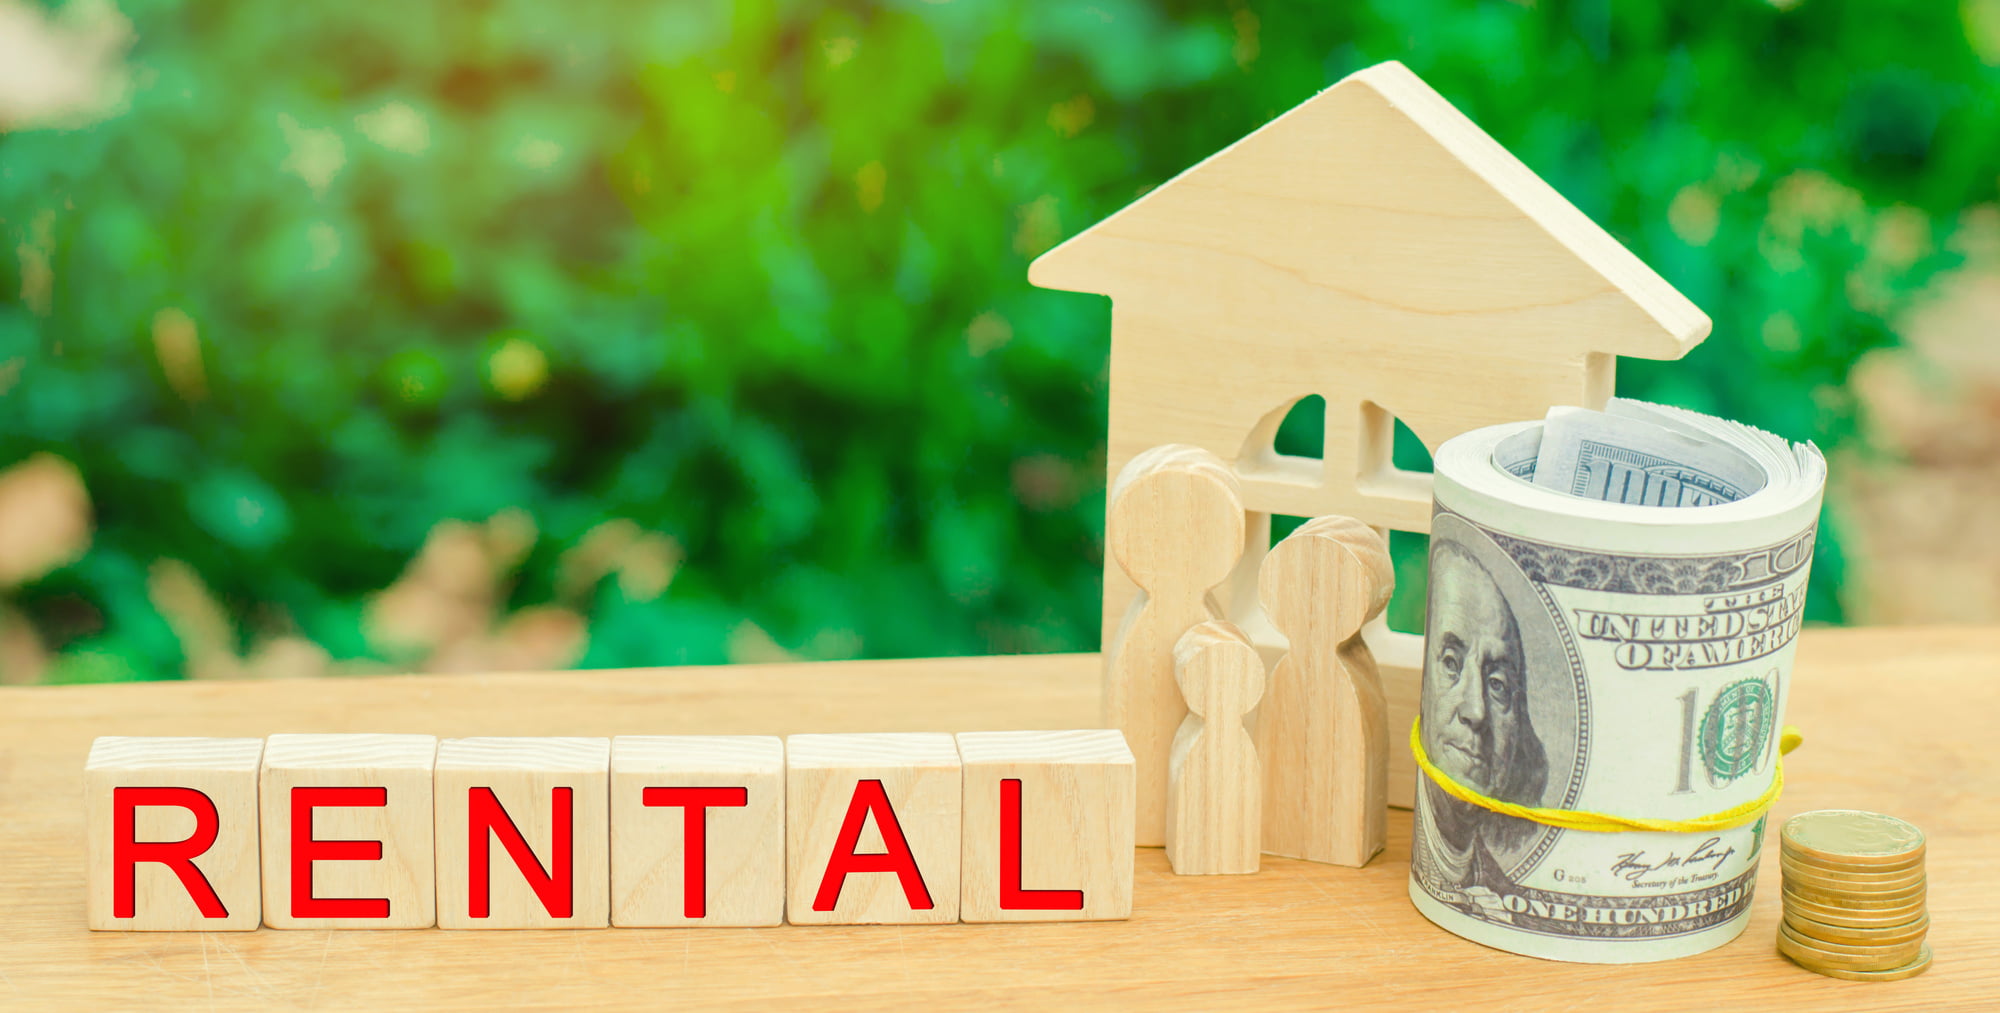 Are you thinking of buying a rental property as an investment? Do you want to know how to evaluate rental property? Read on to learn more.